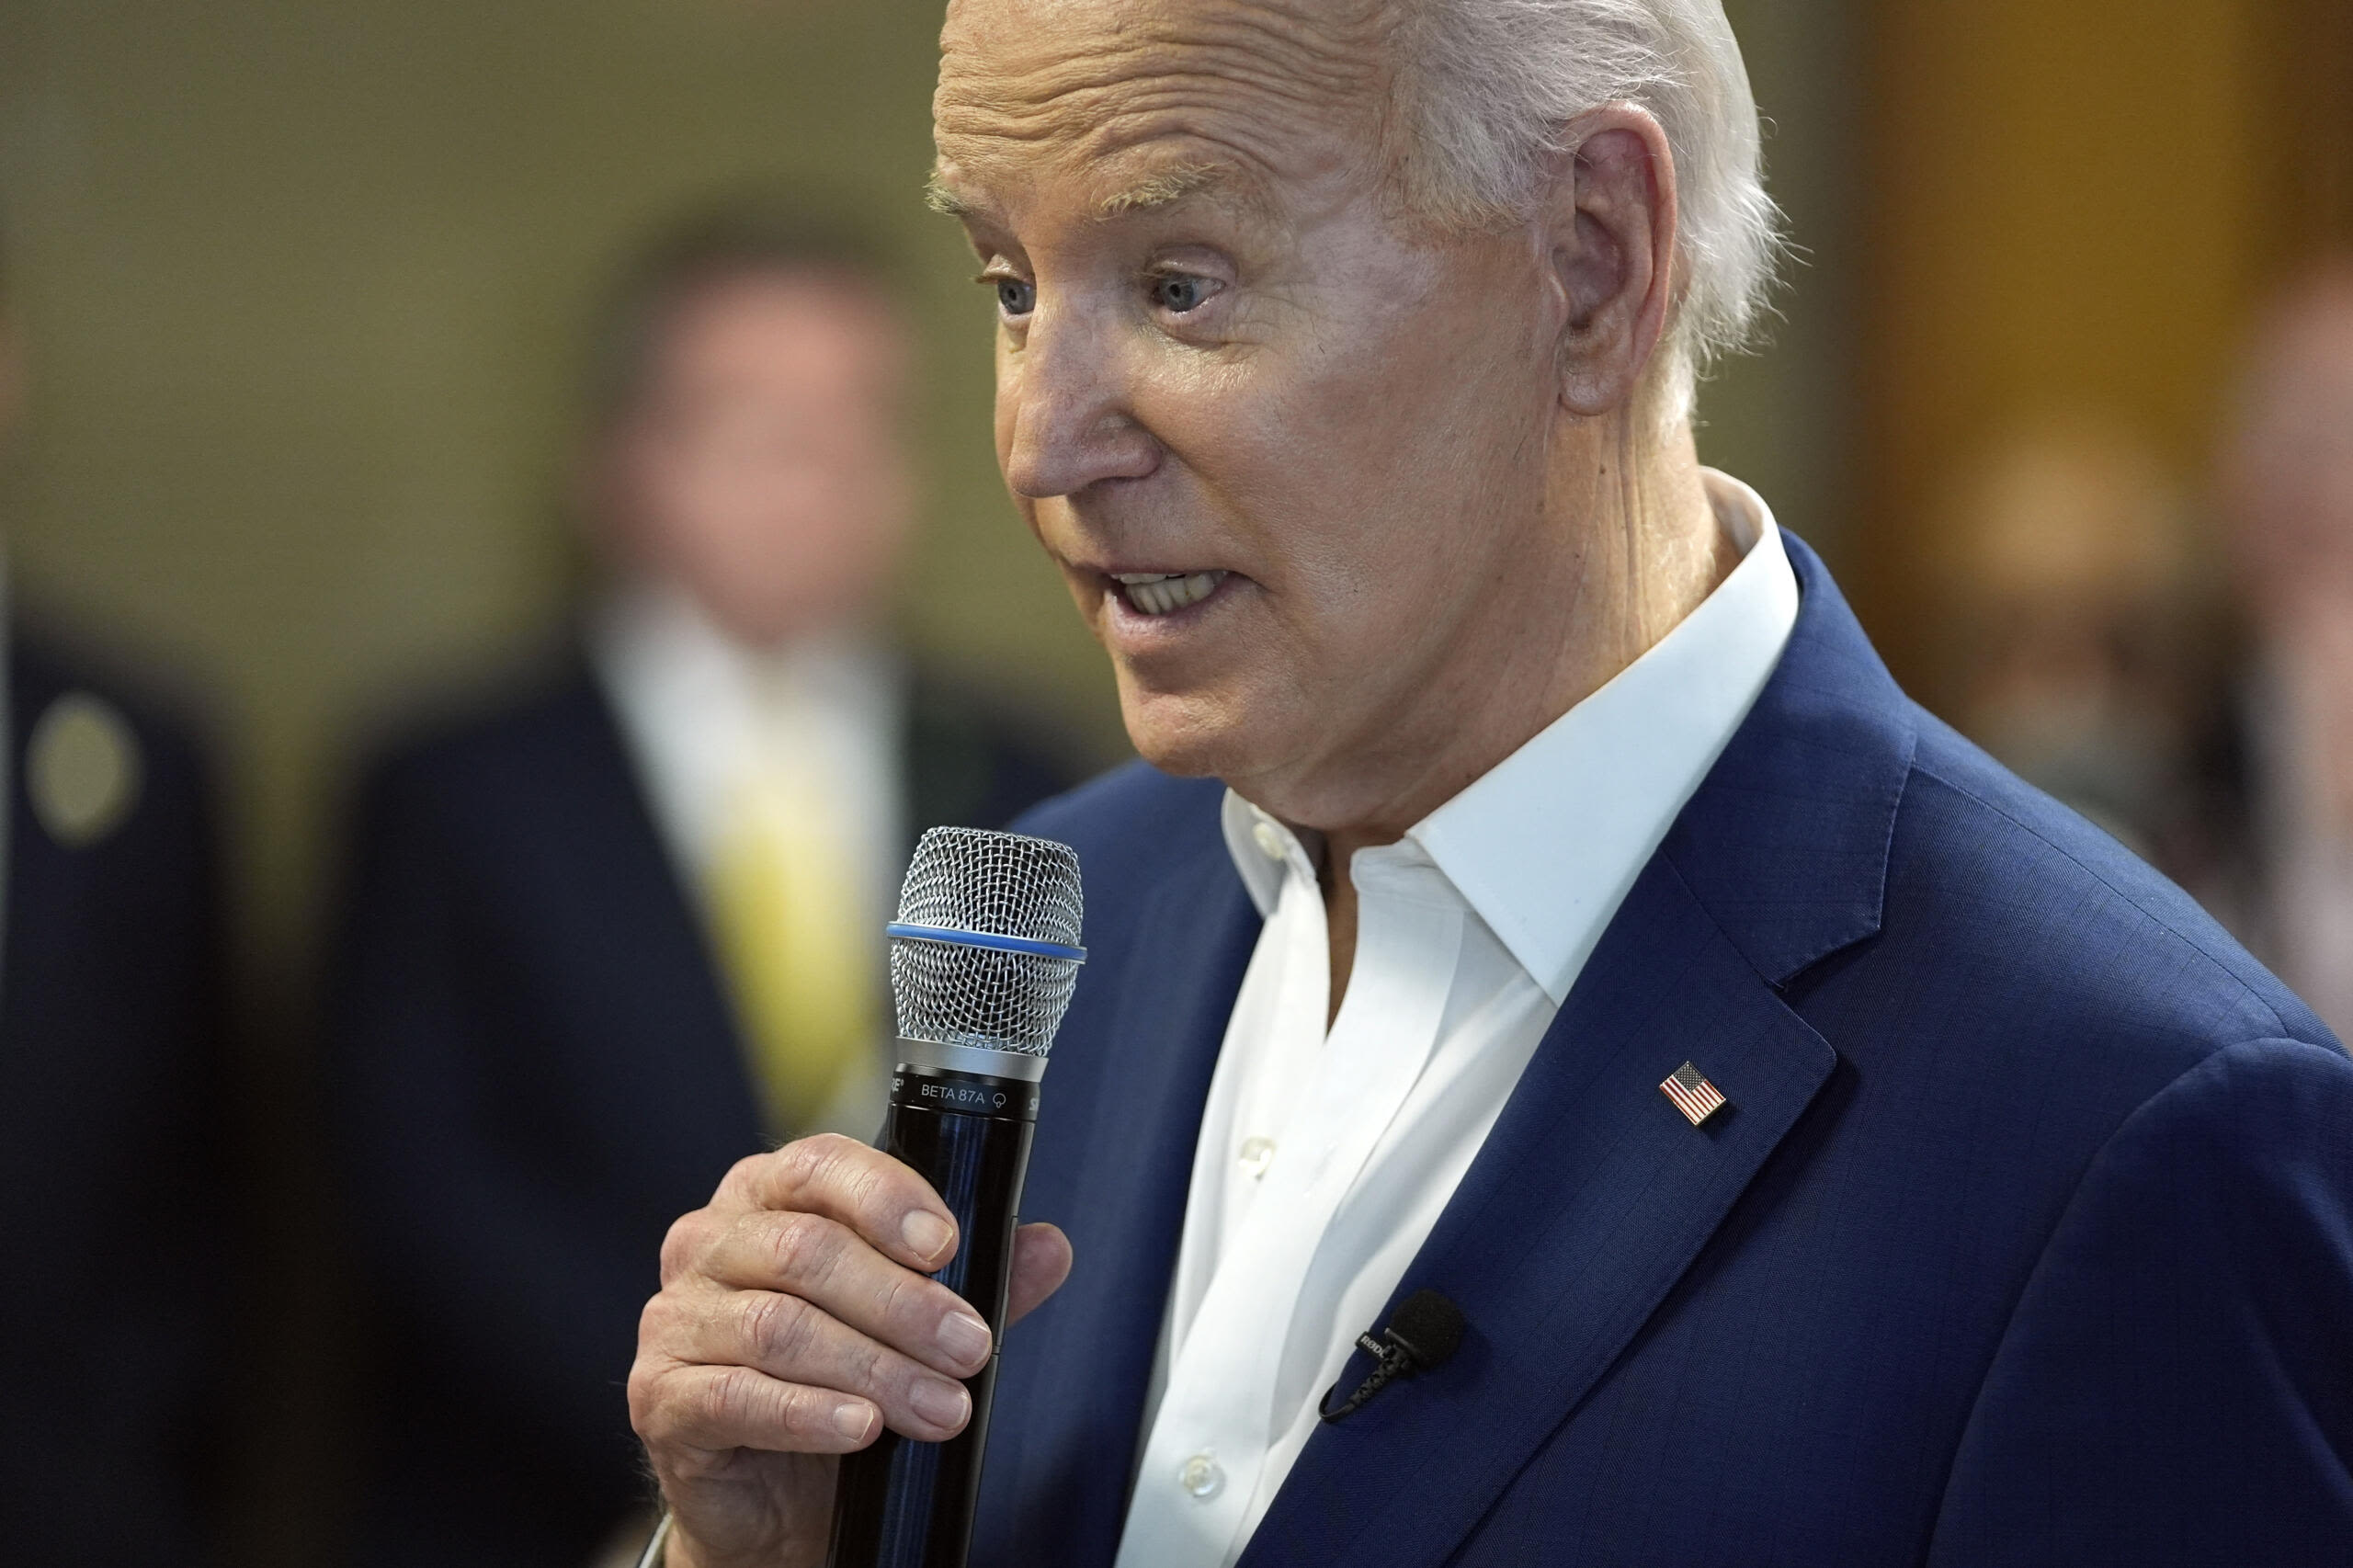 President Biden to visit Seattle for campaign events